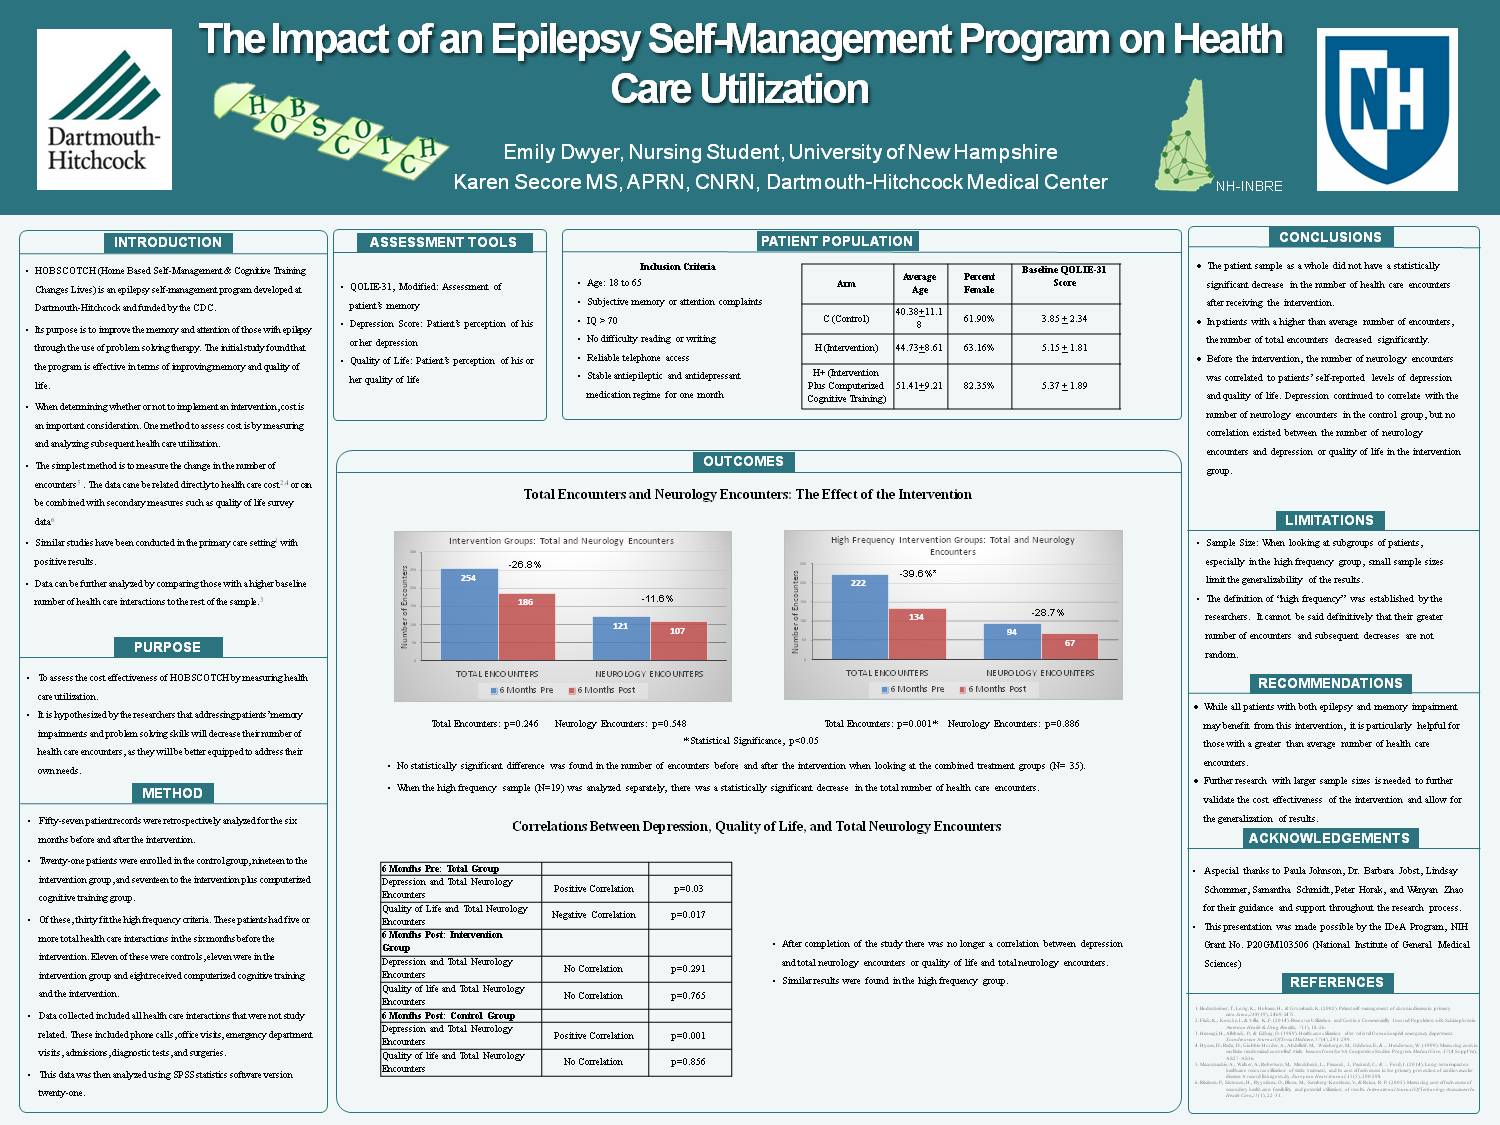 The Impact Of An Epilepsy Self-Management Program On Health Care Utilization by egm98